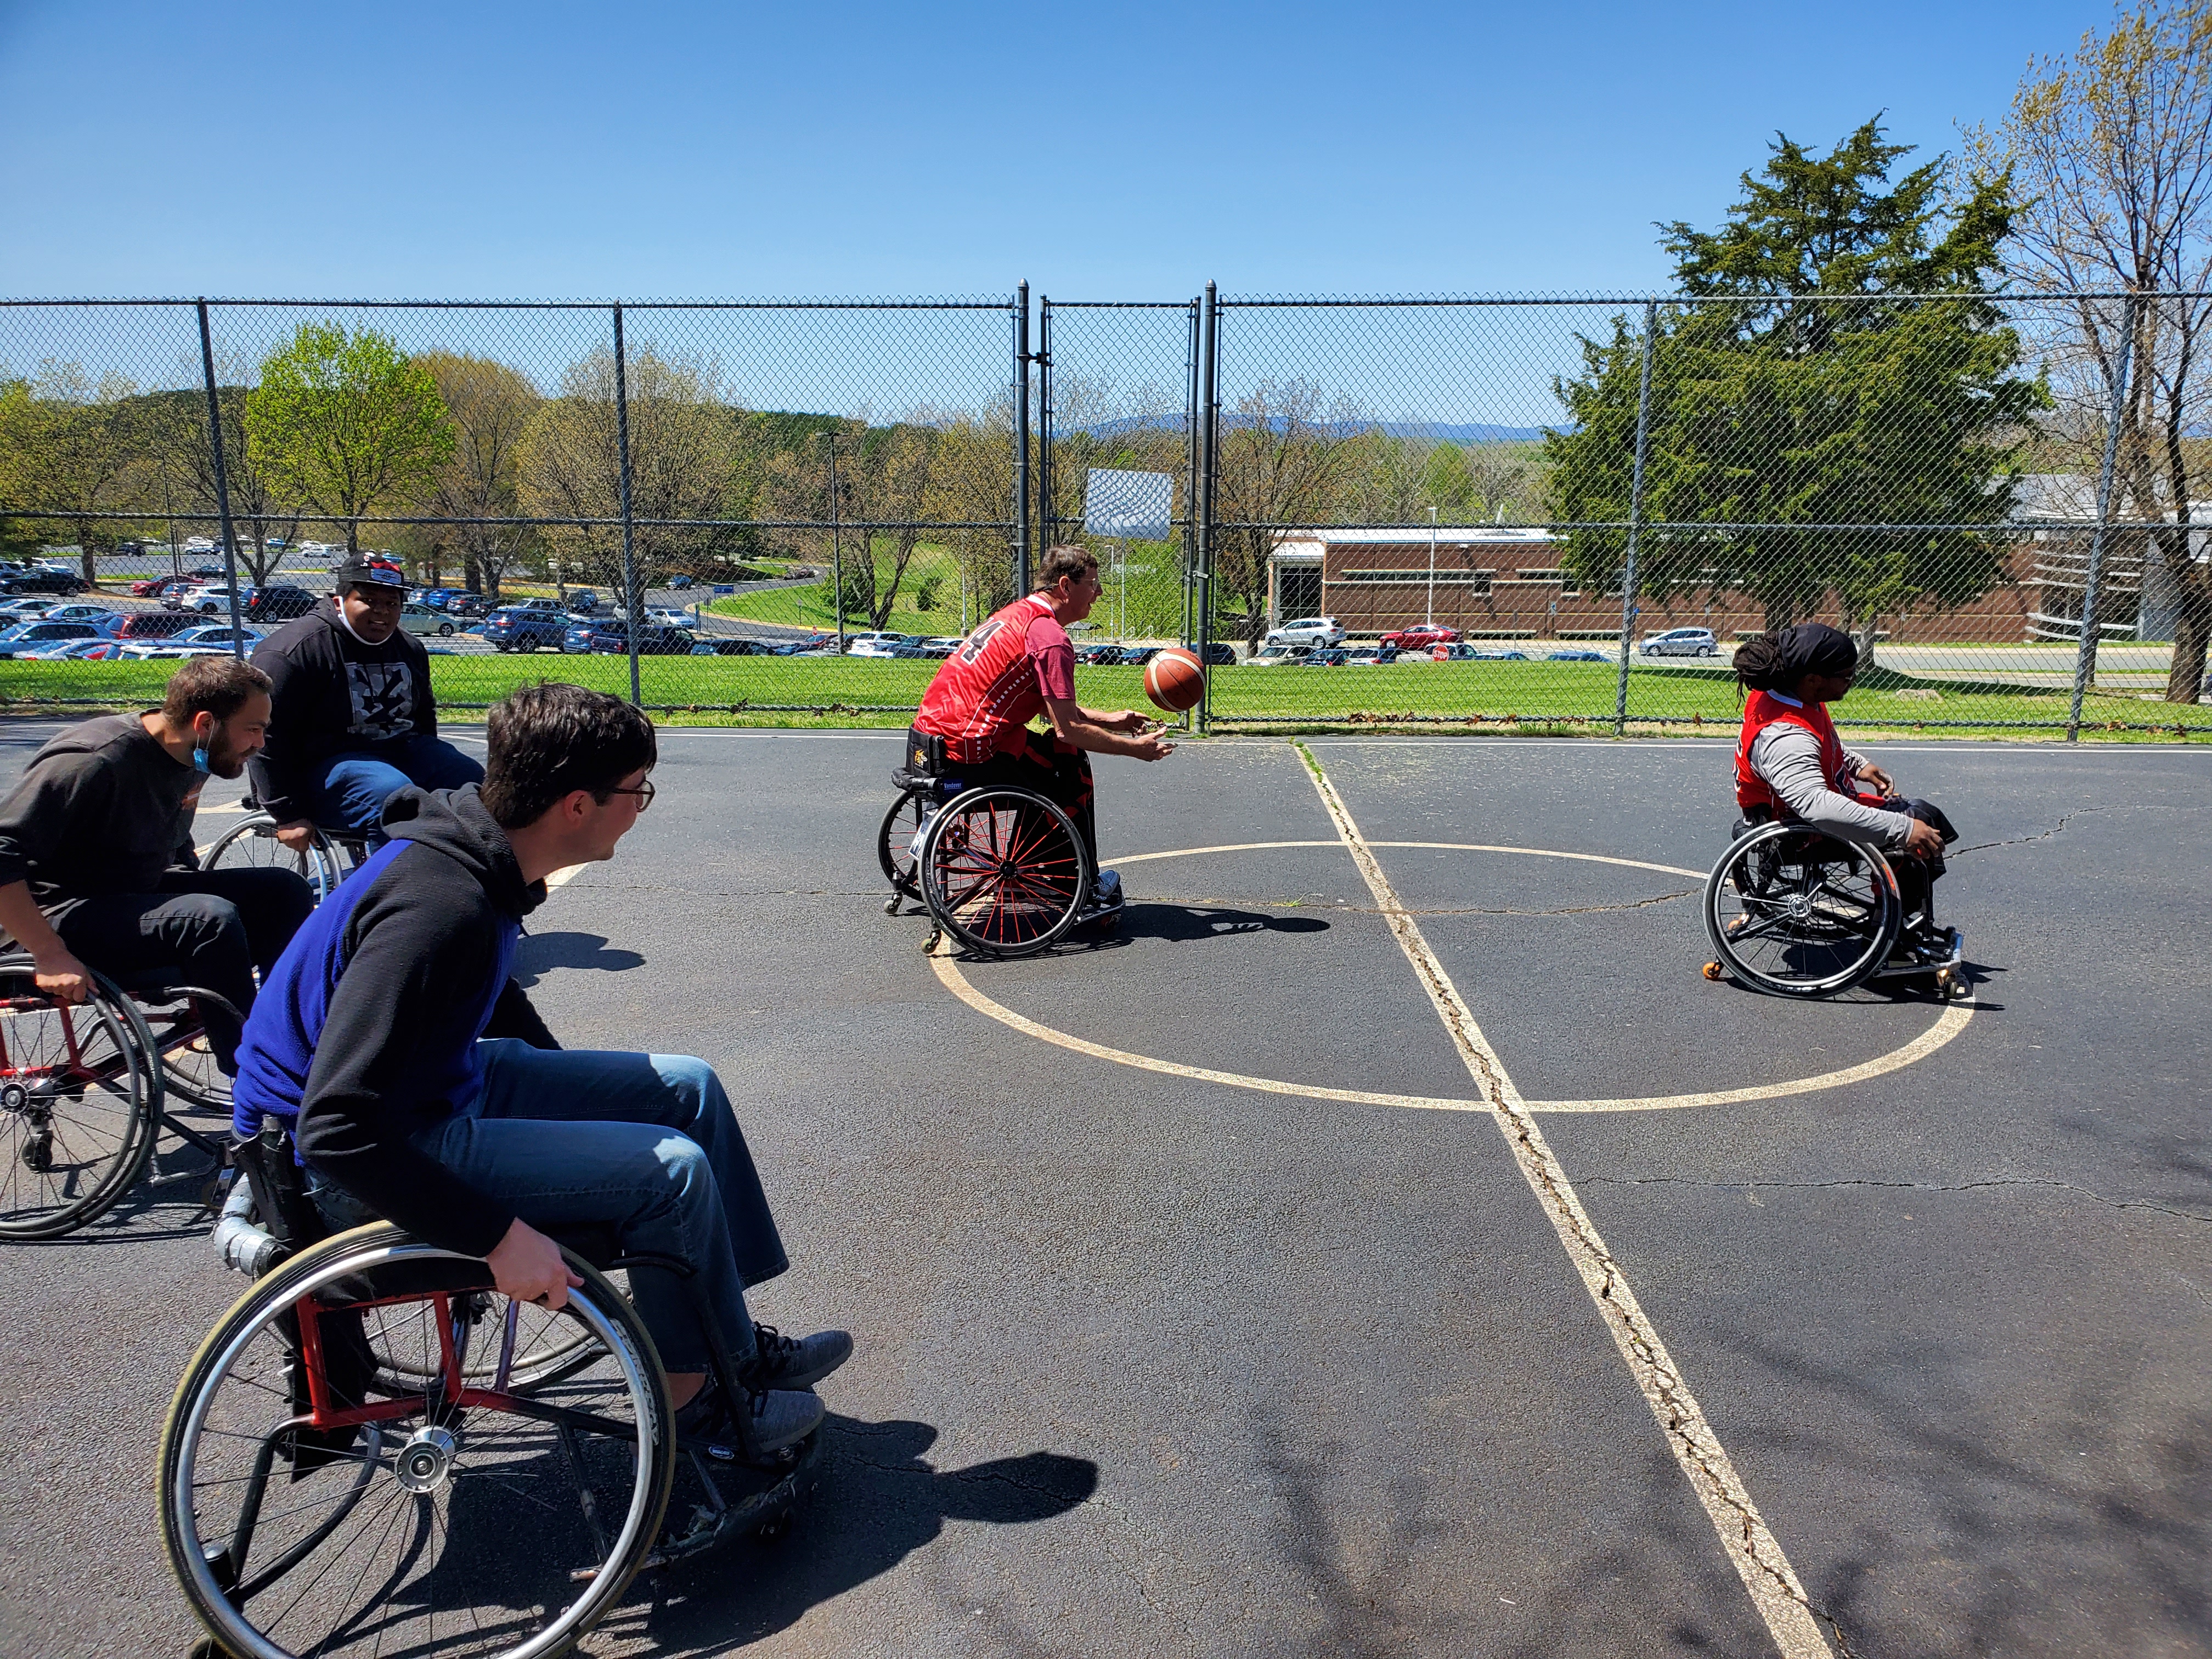 People playing whelchair basketball on the PVCC basketball court.